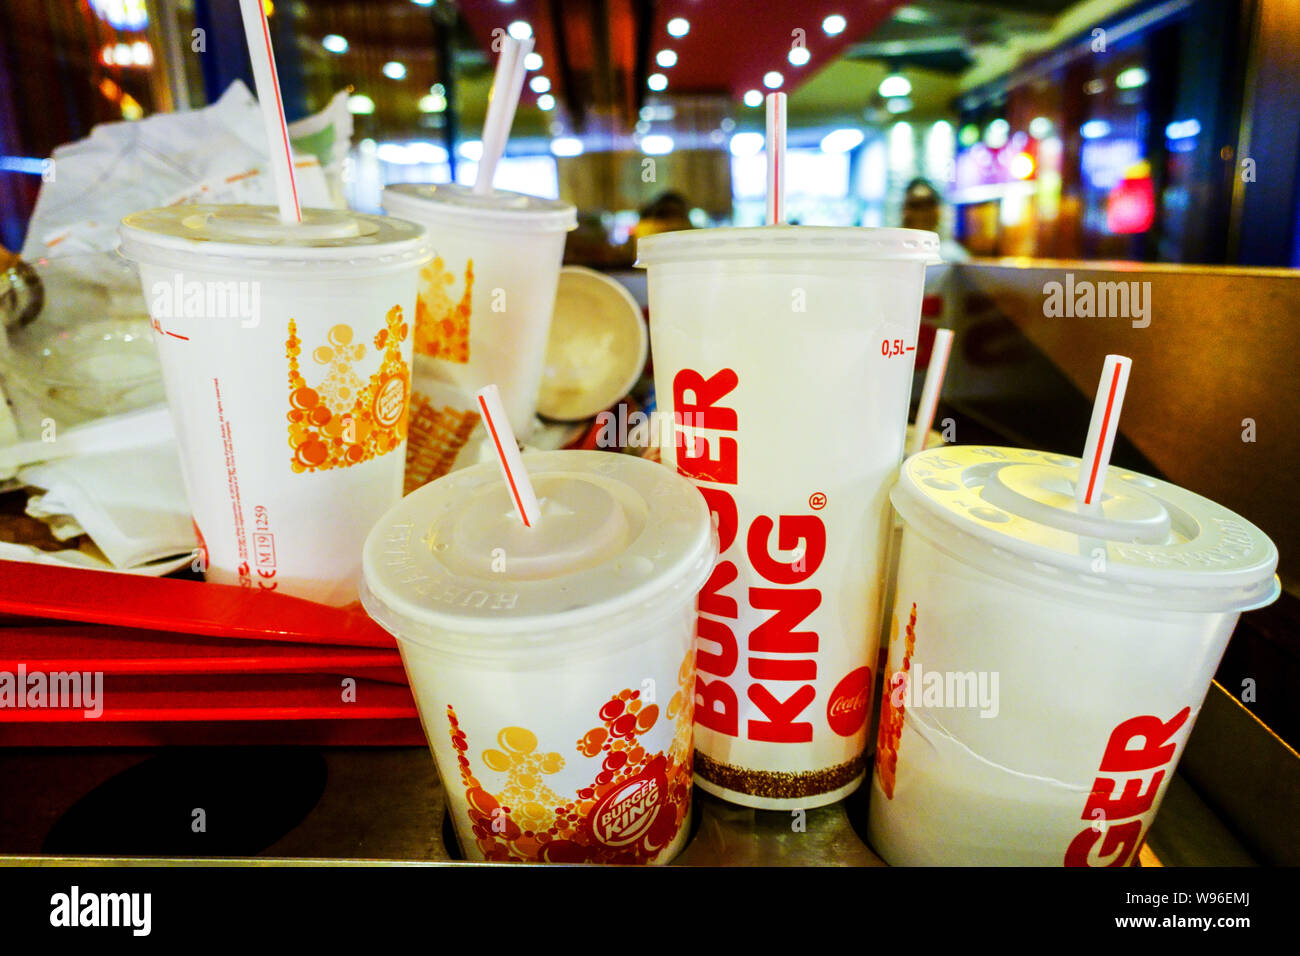 Burger King Straw High Resolution Stock Photography and Images - Alamy